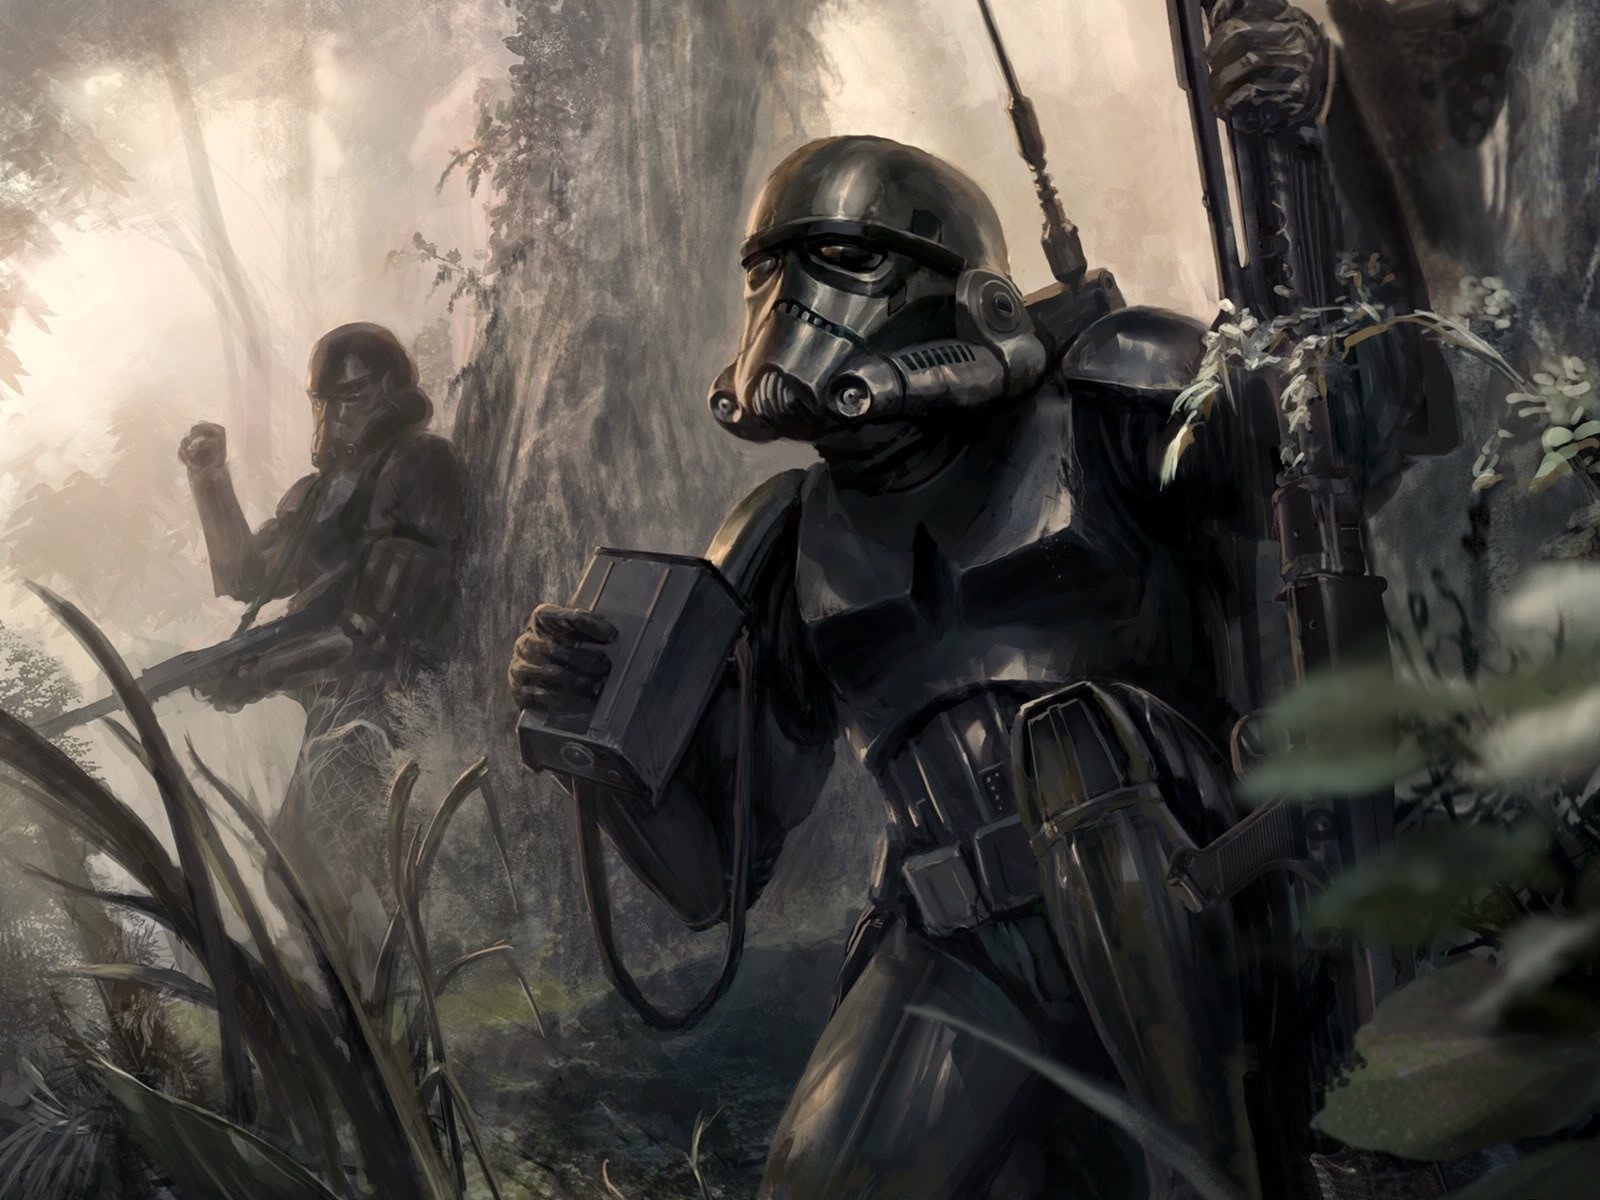 Team Of Shadow Stormtroopers Tracking Down Rebels